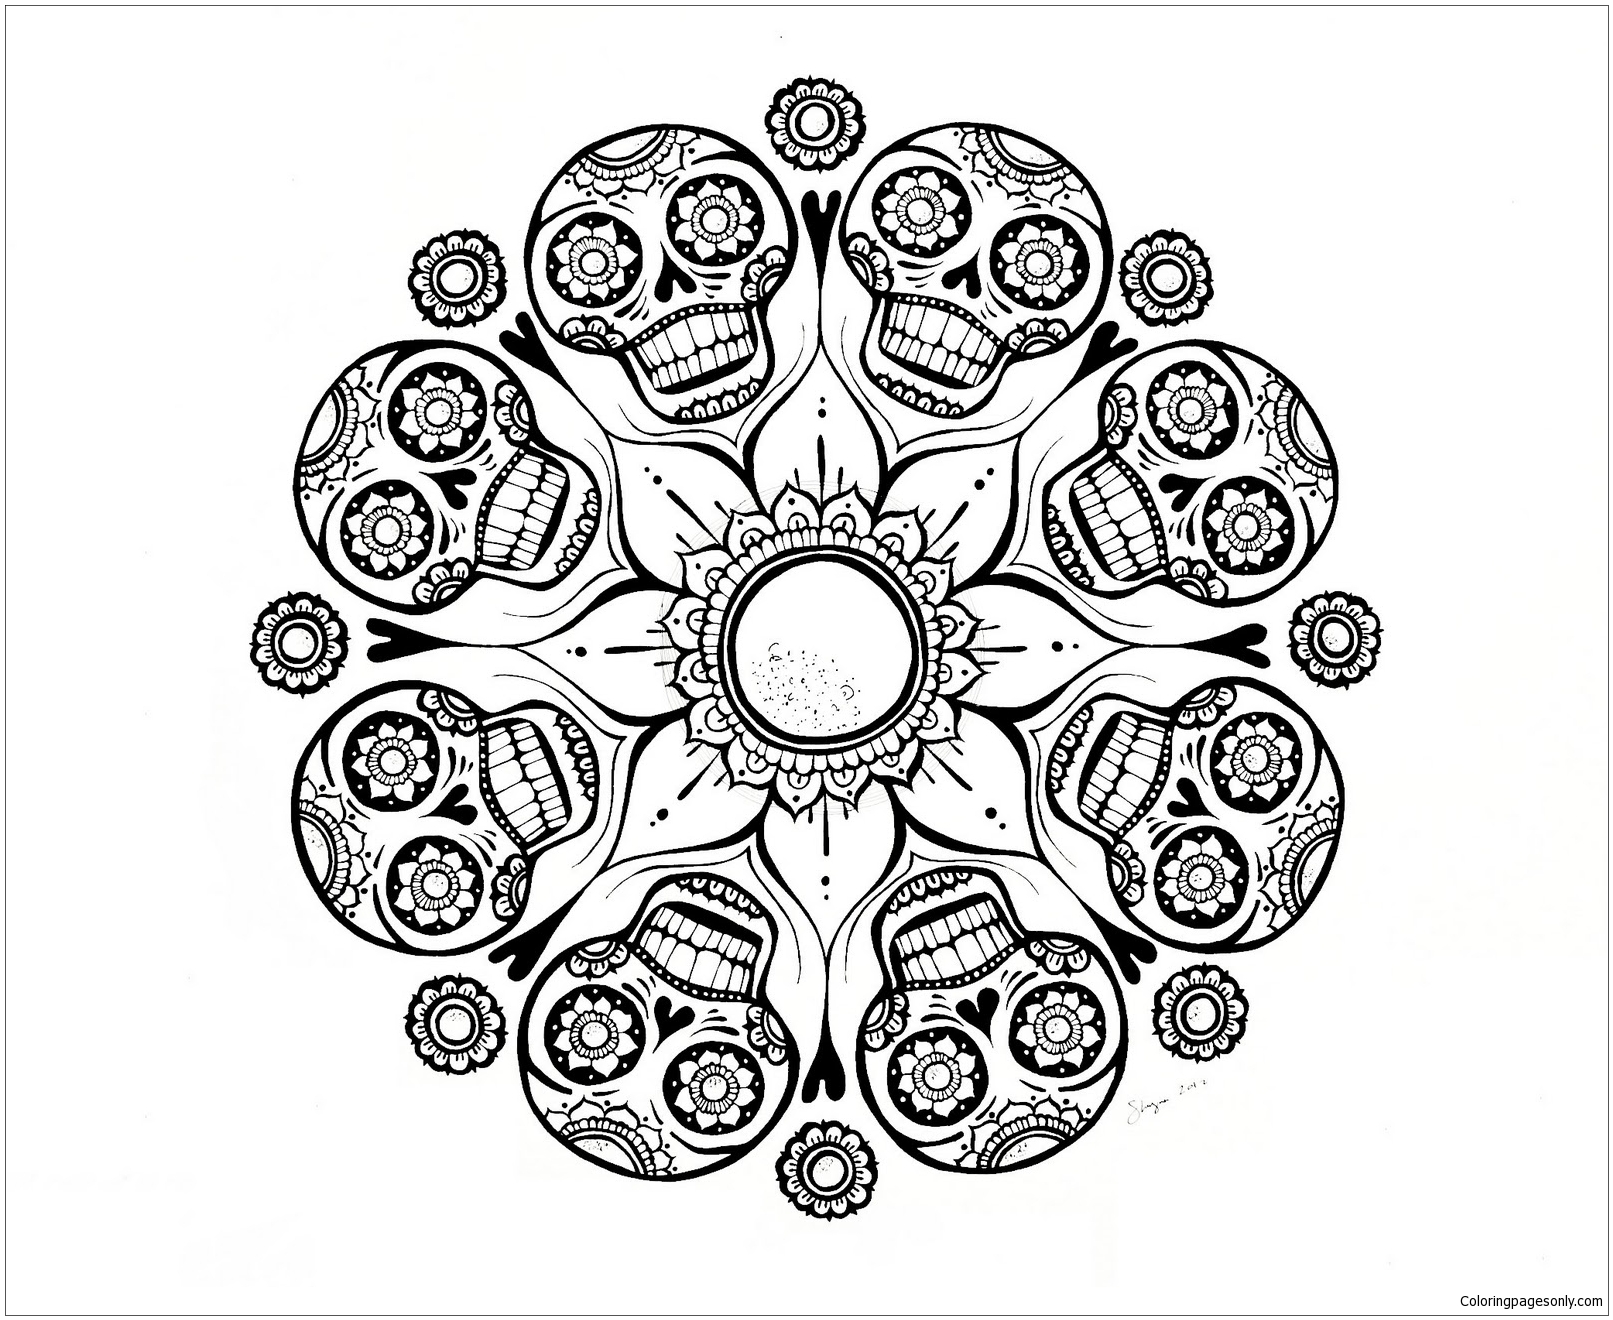 Download Sugar Skull Flower Finished Coloring Page - Free Coloring Pages Online